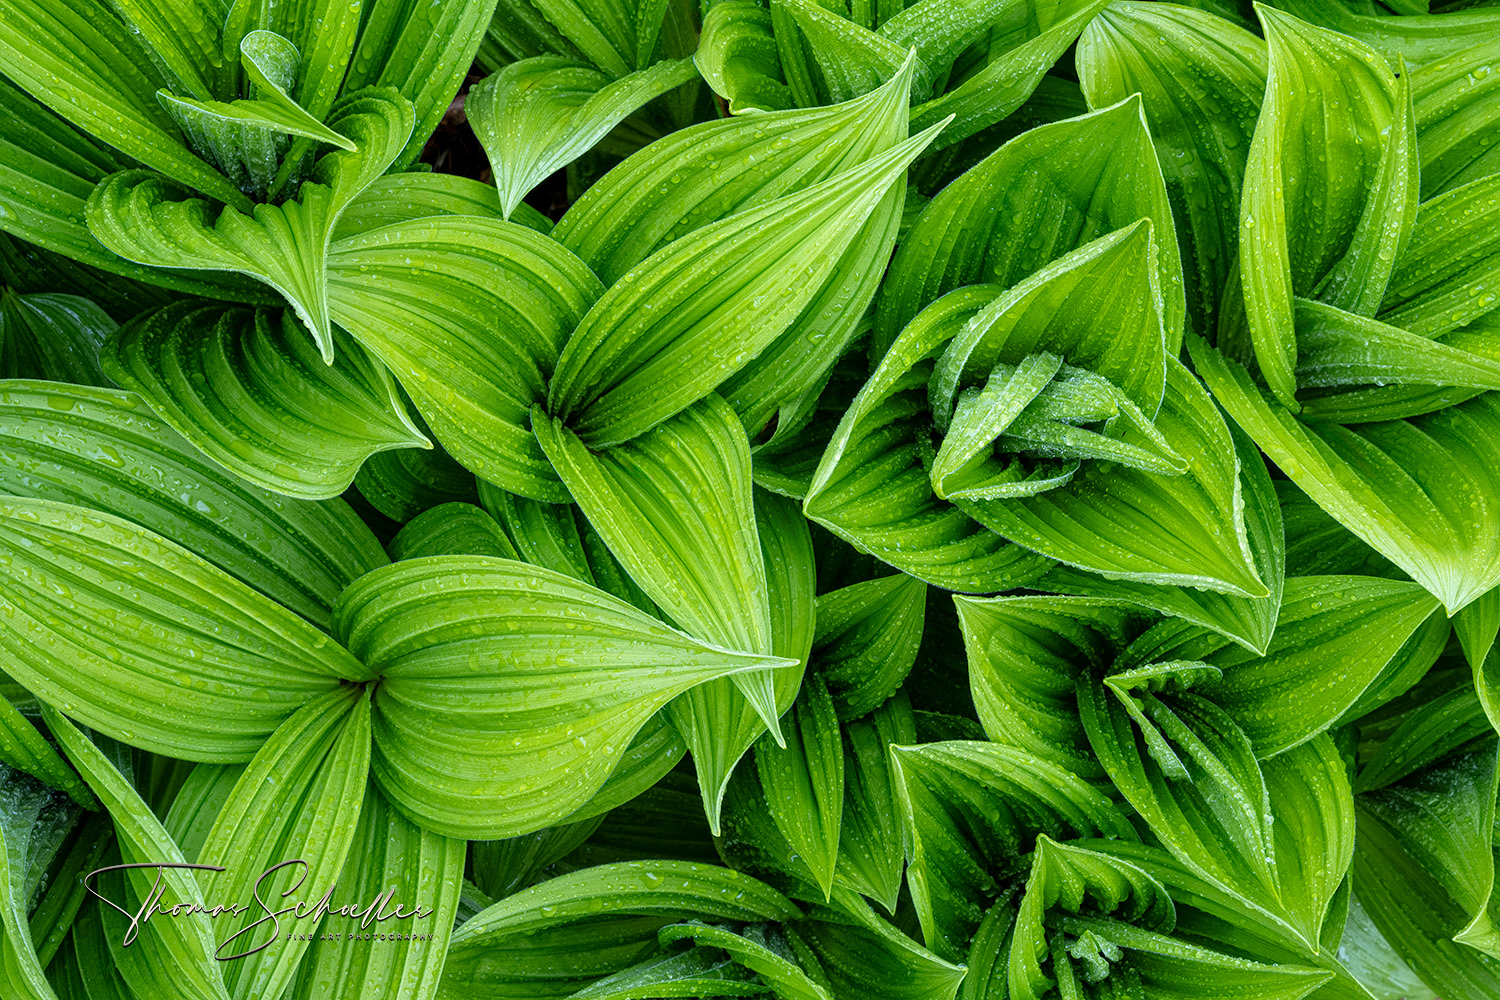 Interwoven Sensual Flowing Lines and Patterns of Vibrant Emerald Corn Lilies Form Abstract Patterns | Luxury Edition Fine Art Prints